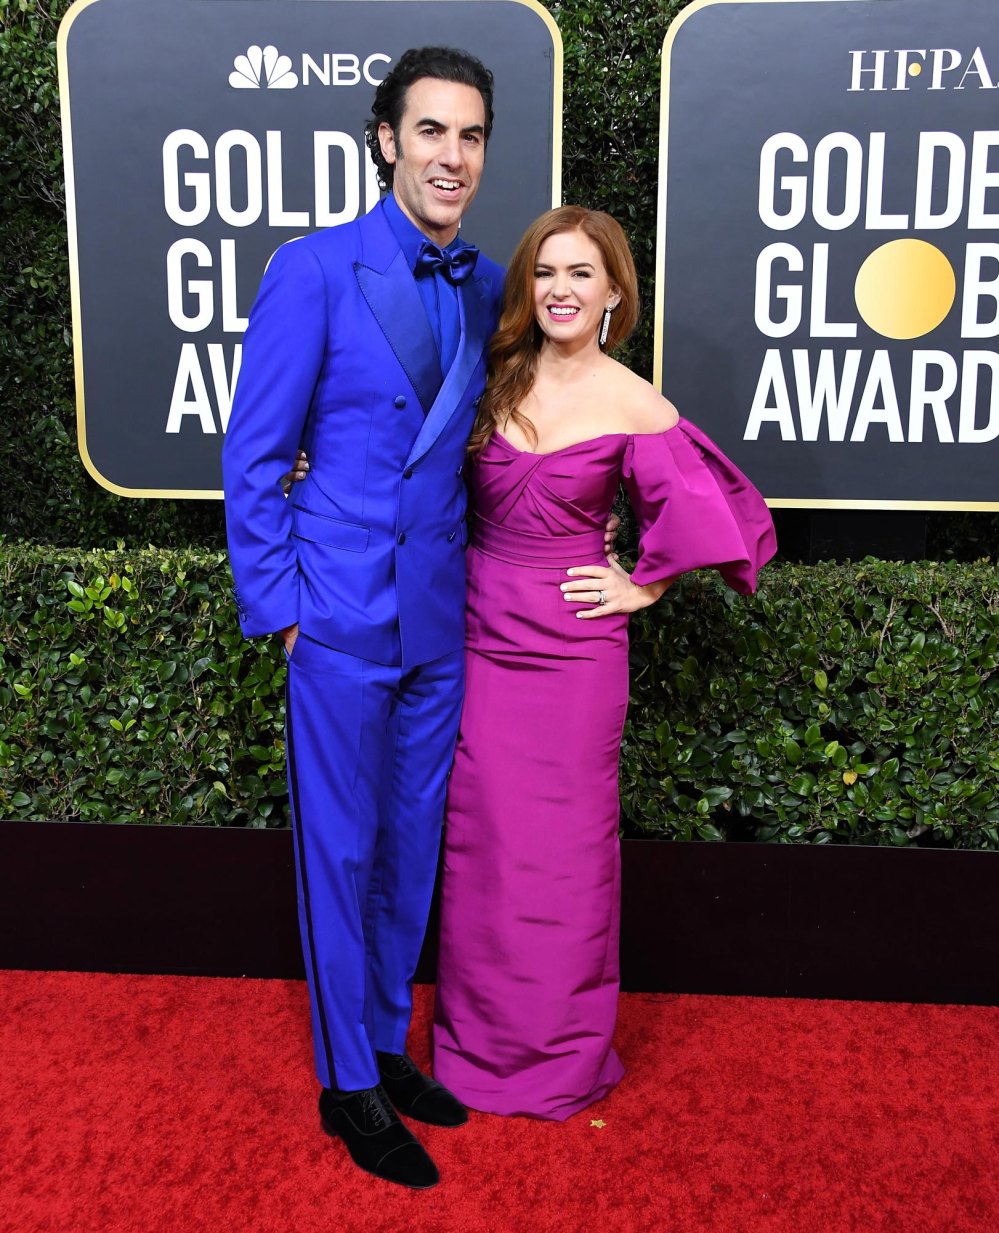 All the Signs Isla Fisher and Sacha Baron Cohen Were Headed for Divorce